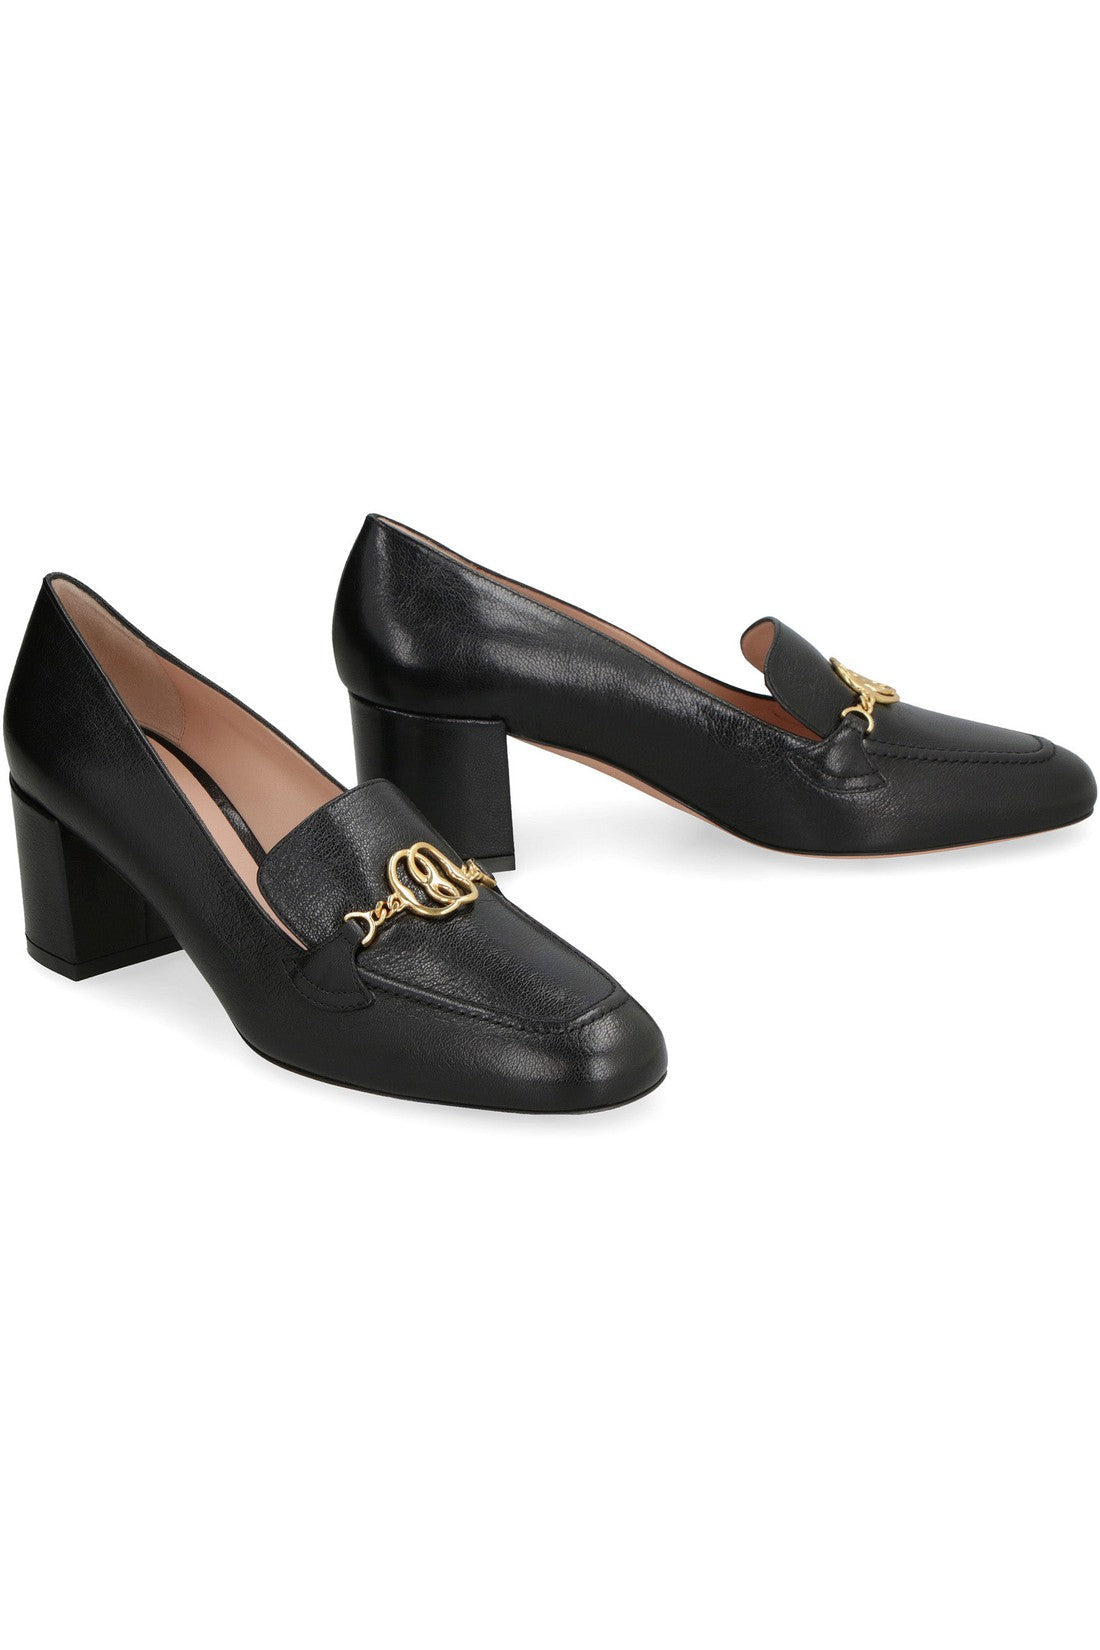 Bally-OUTLET-SALE-Obrien 50 leather loafers-ARCHIVIST